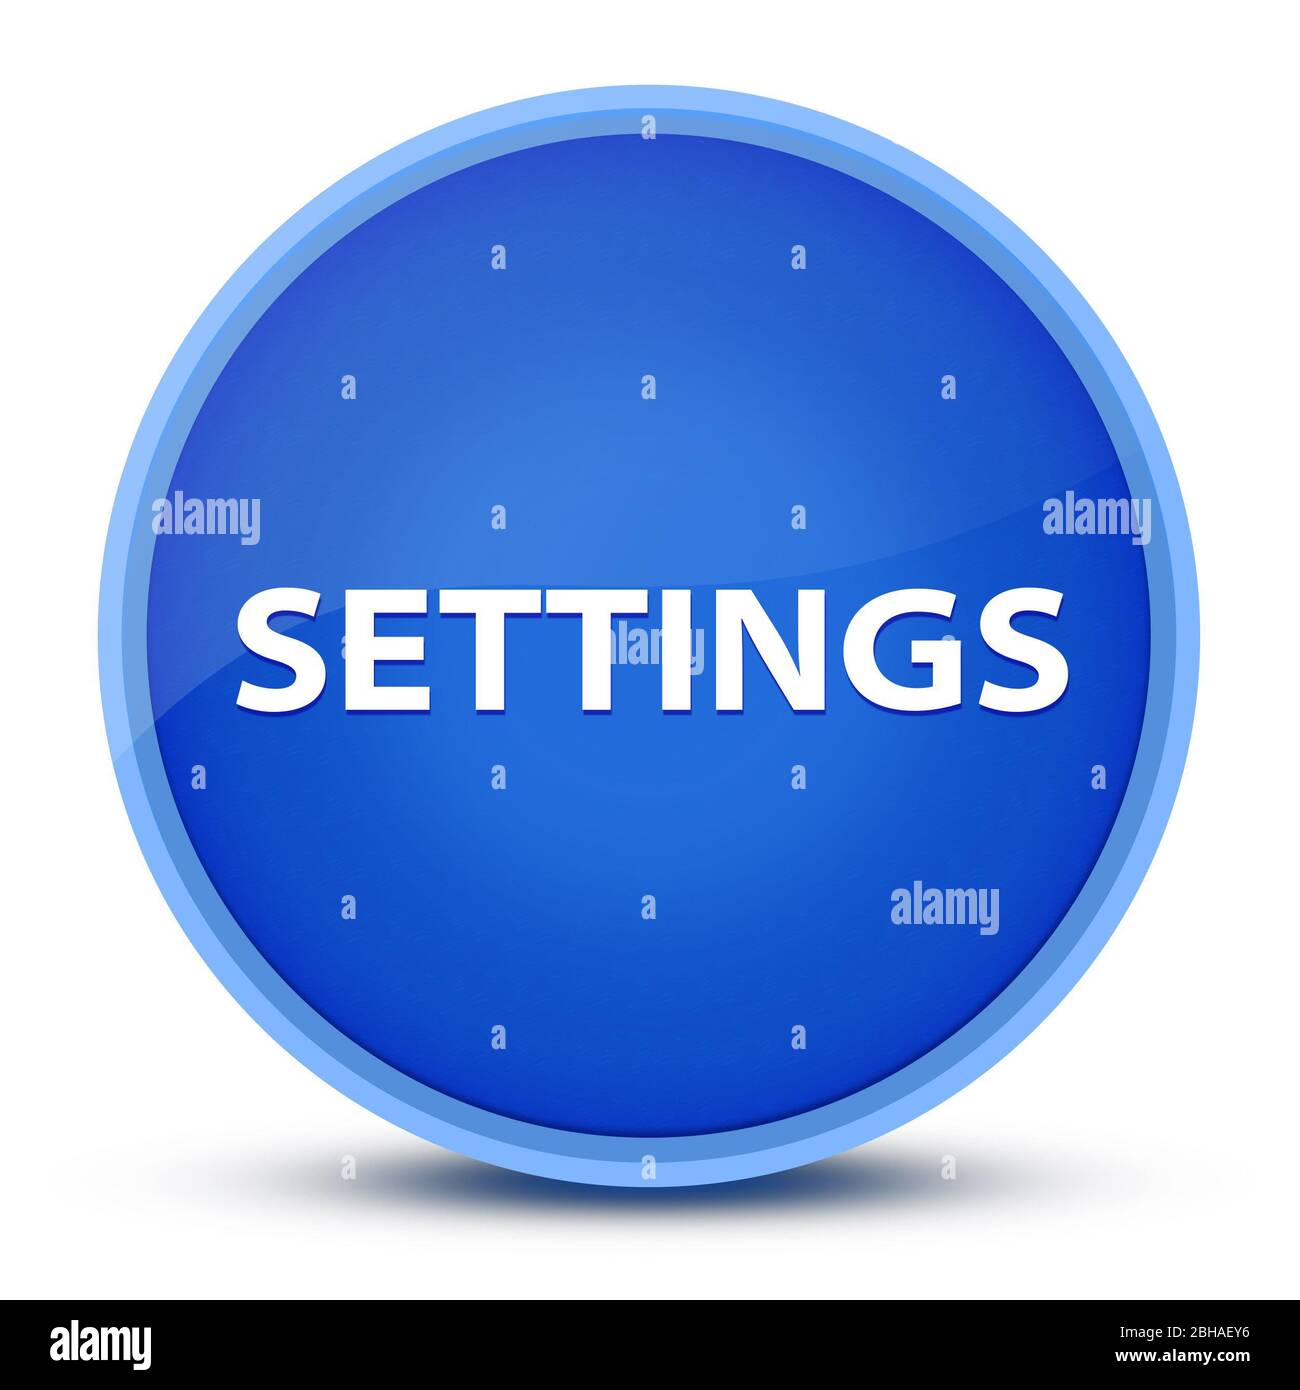 Settings isolated on special blue round button abstract illustration Stock Photo